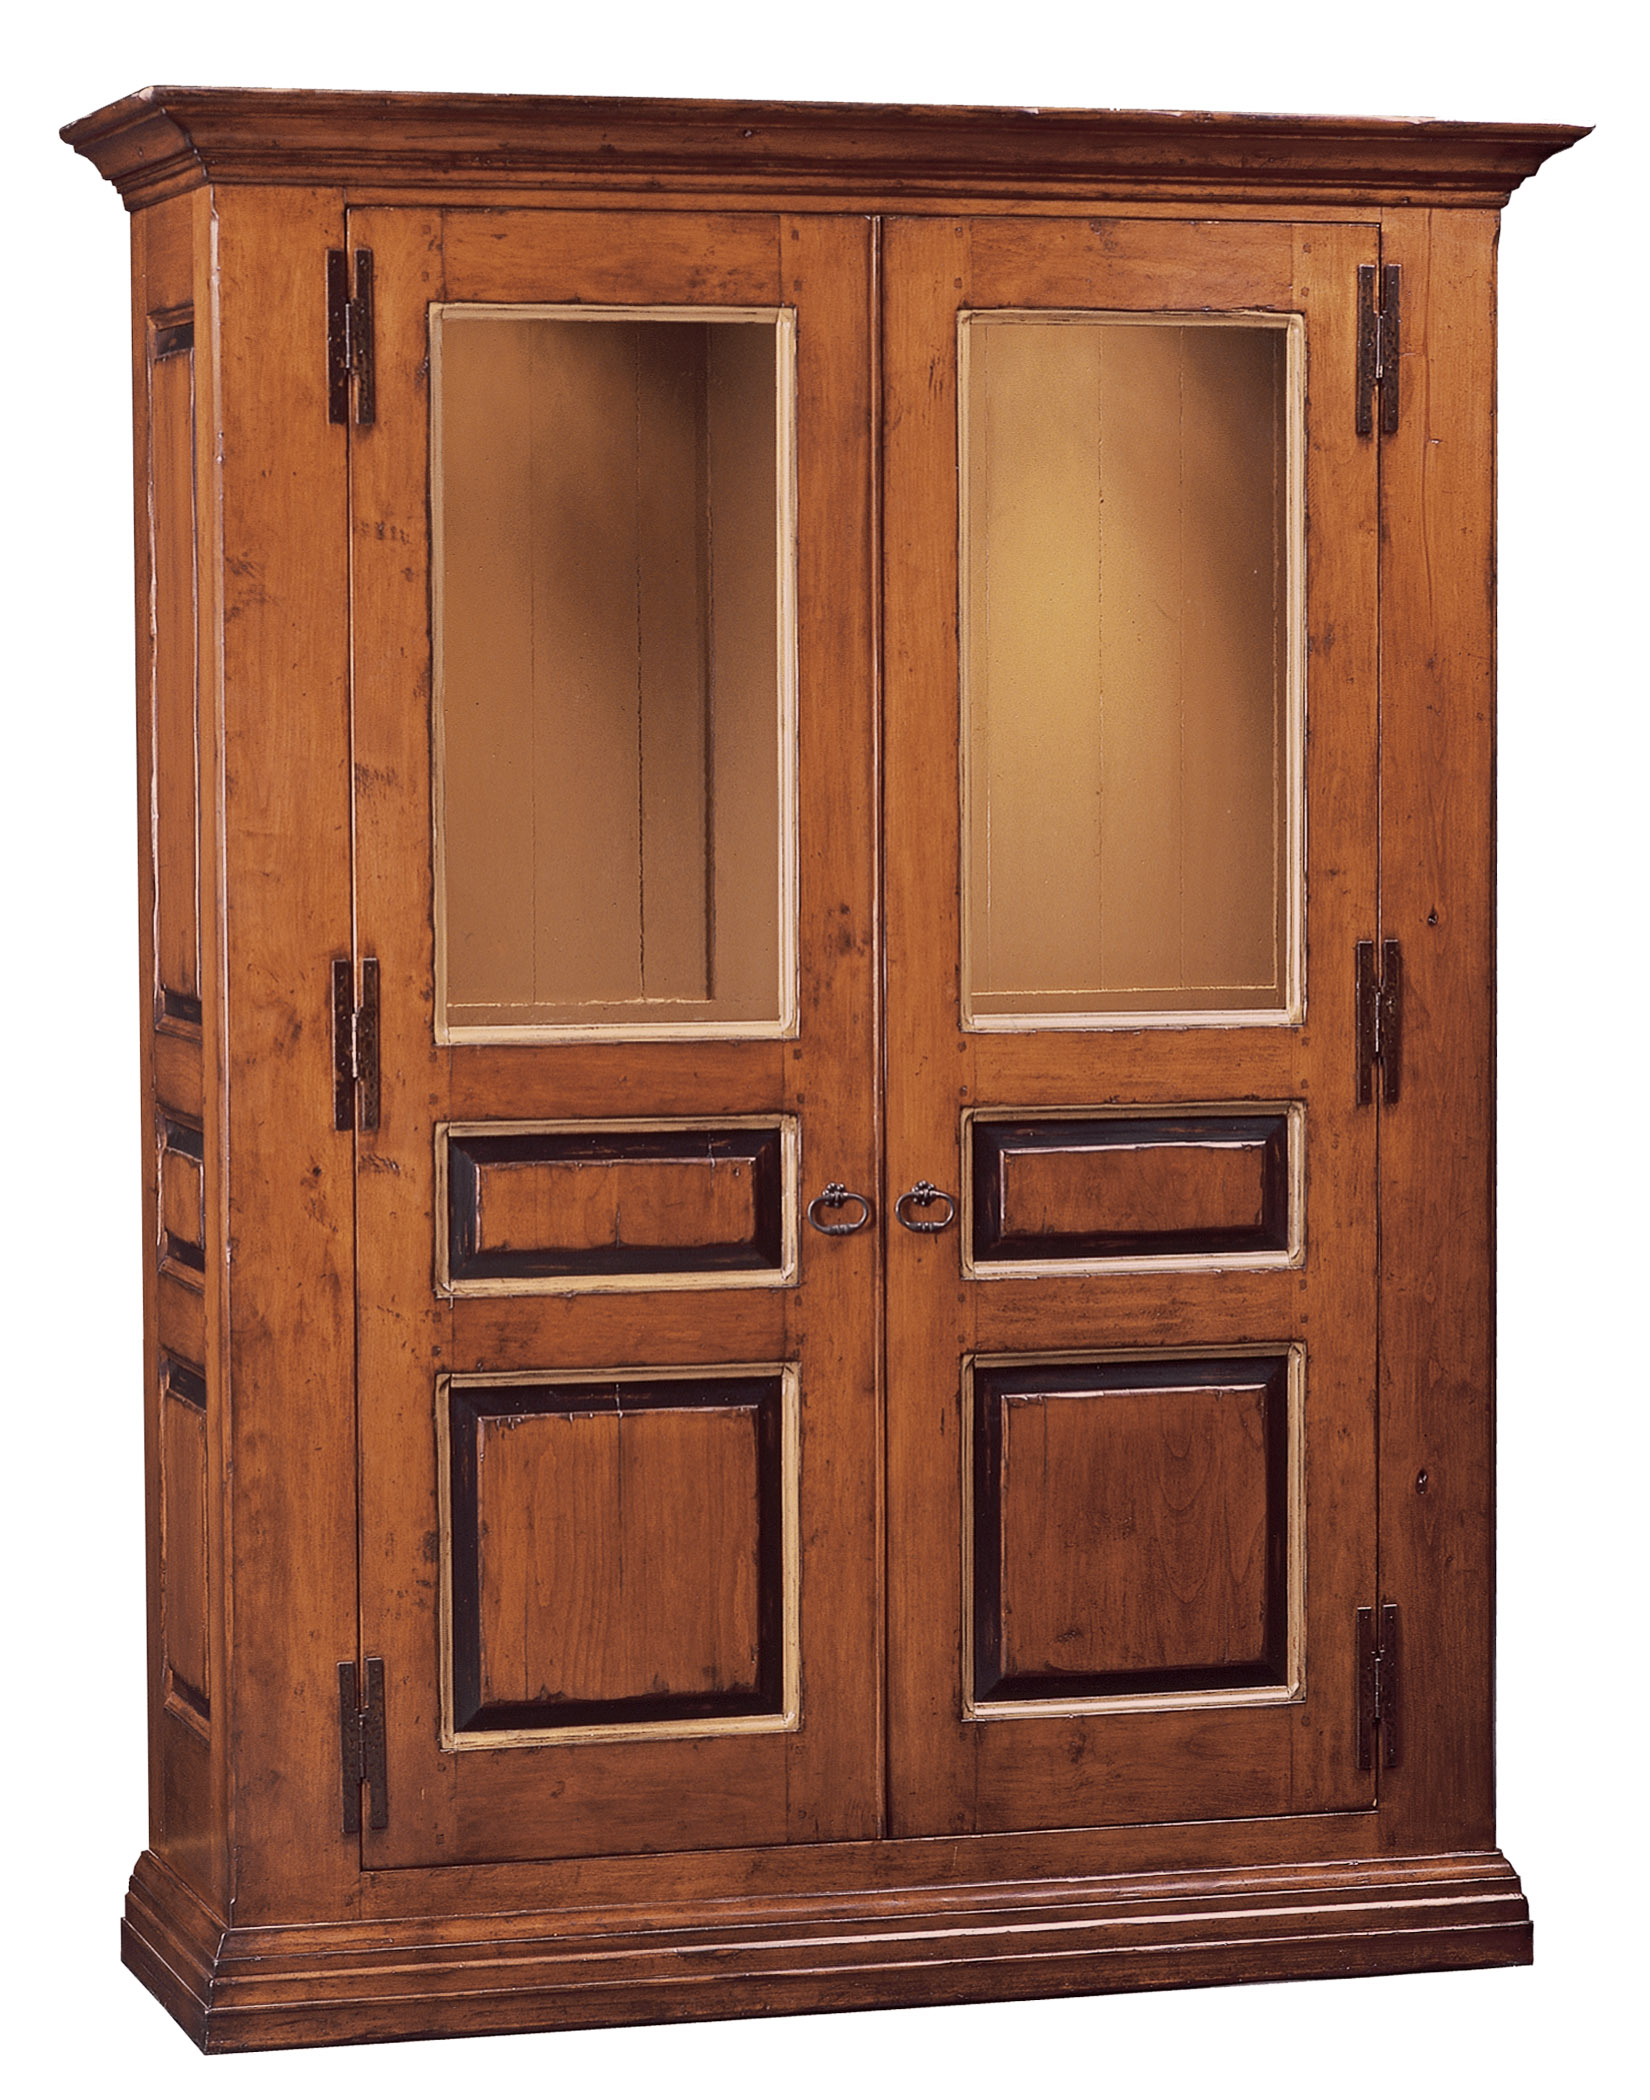 Bandini tradtional french country farmhouse cabinet with glass panel doors by Woodland Furniture in Idaho Falls, USA